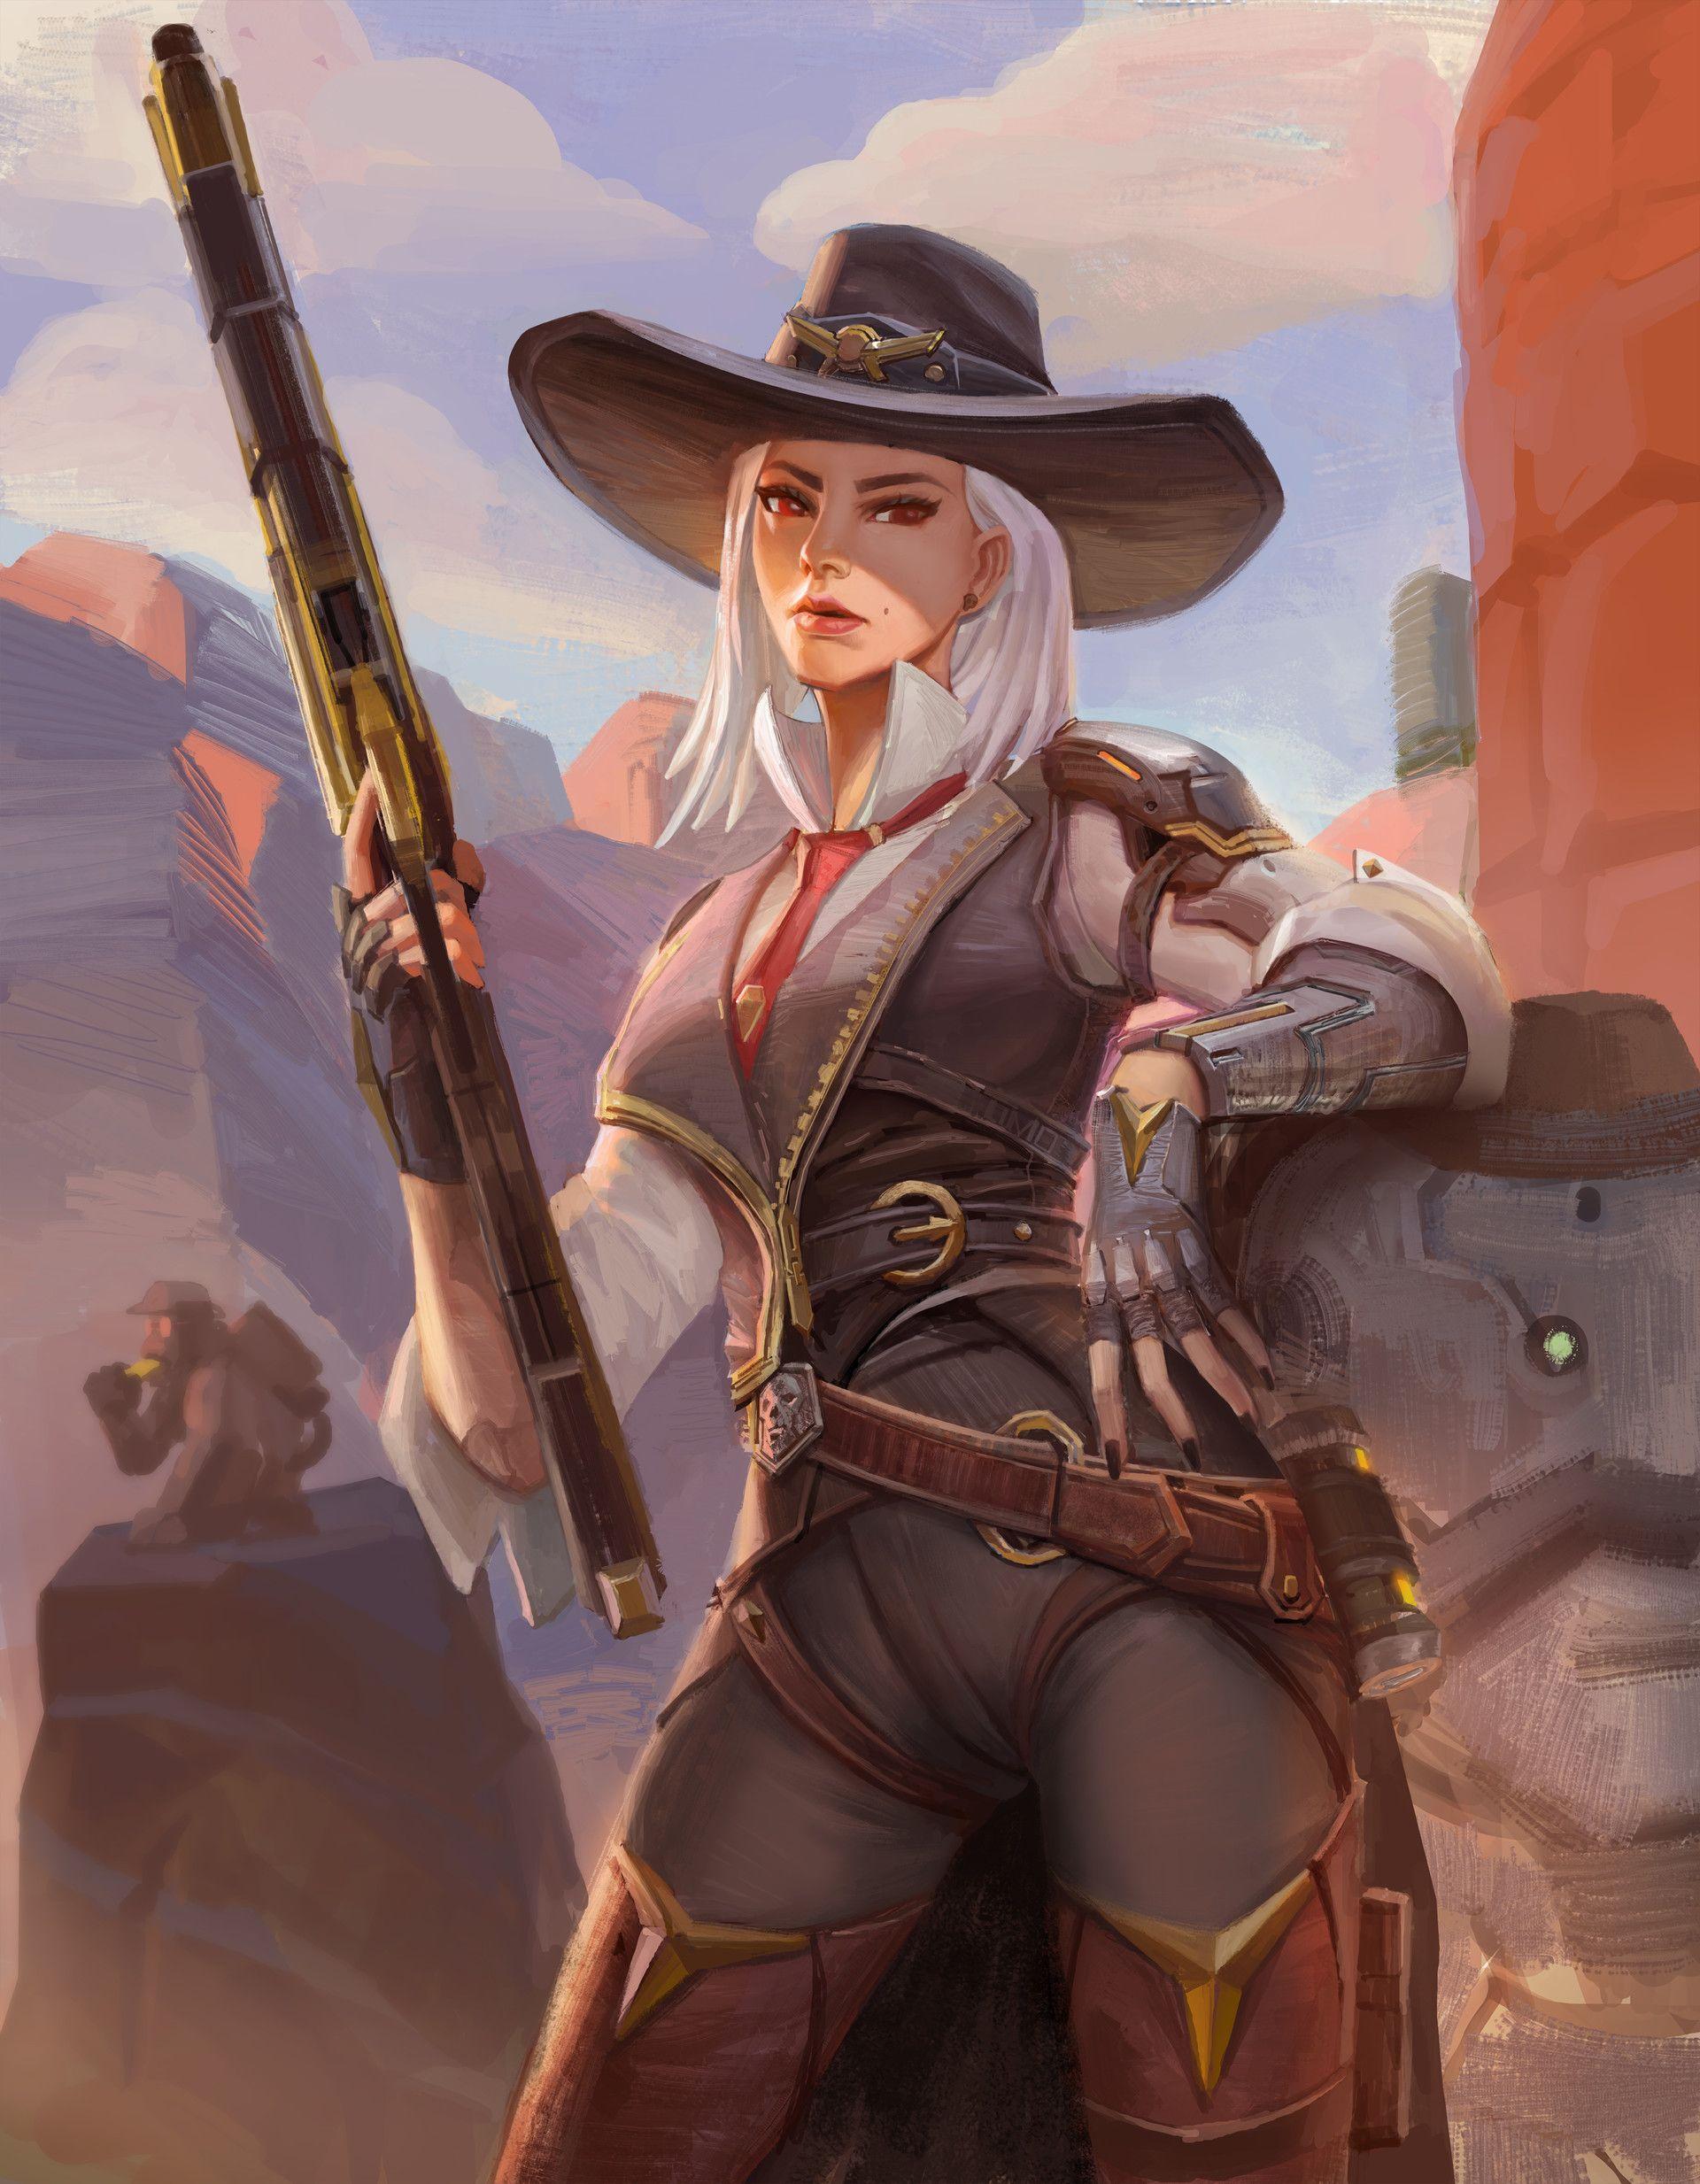 ashe overwatch 1080P 2k 4k Full HD Wallpapers Backgrounds Free Download   Wallpaper Crafter